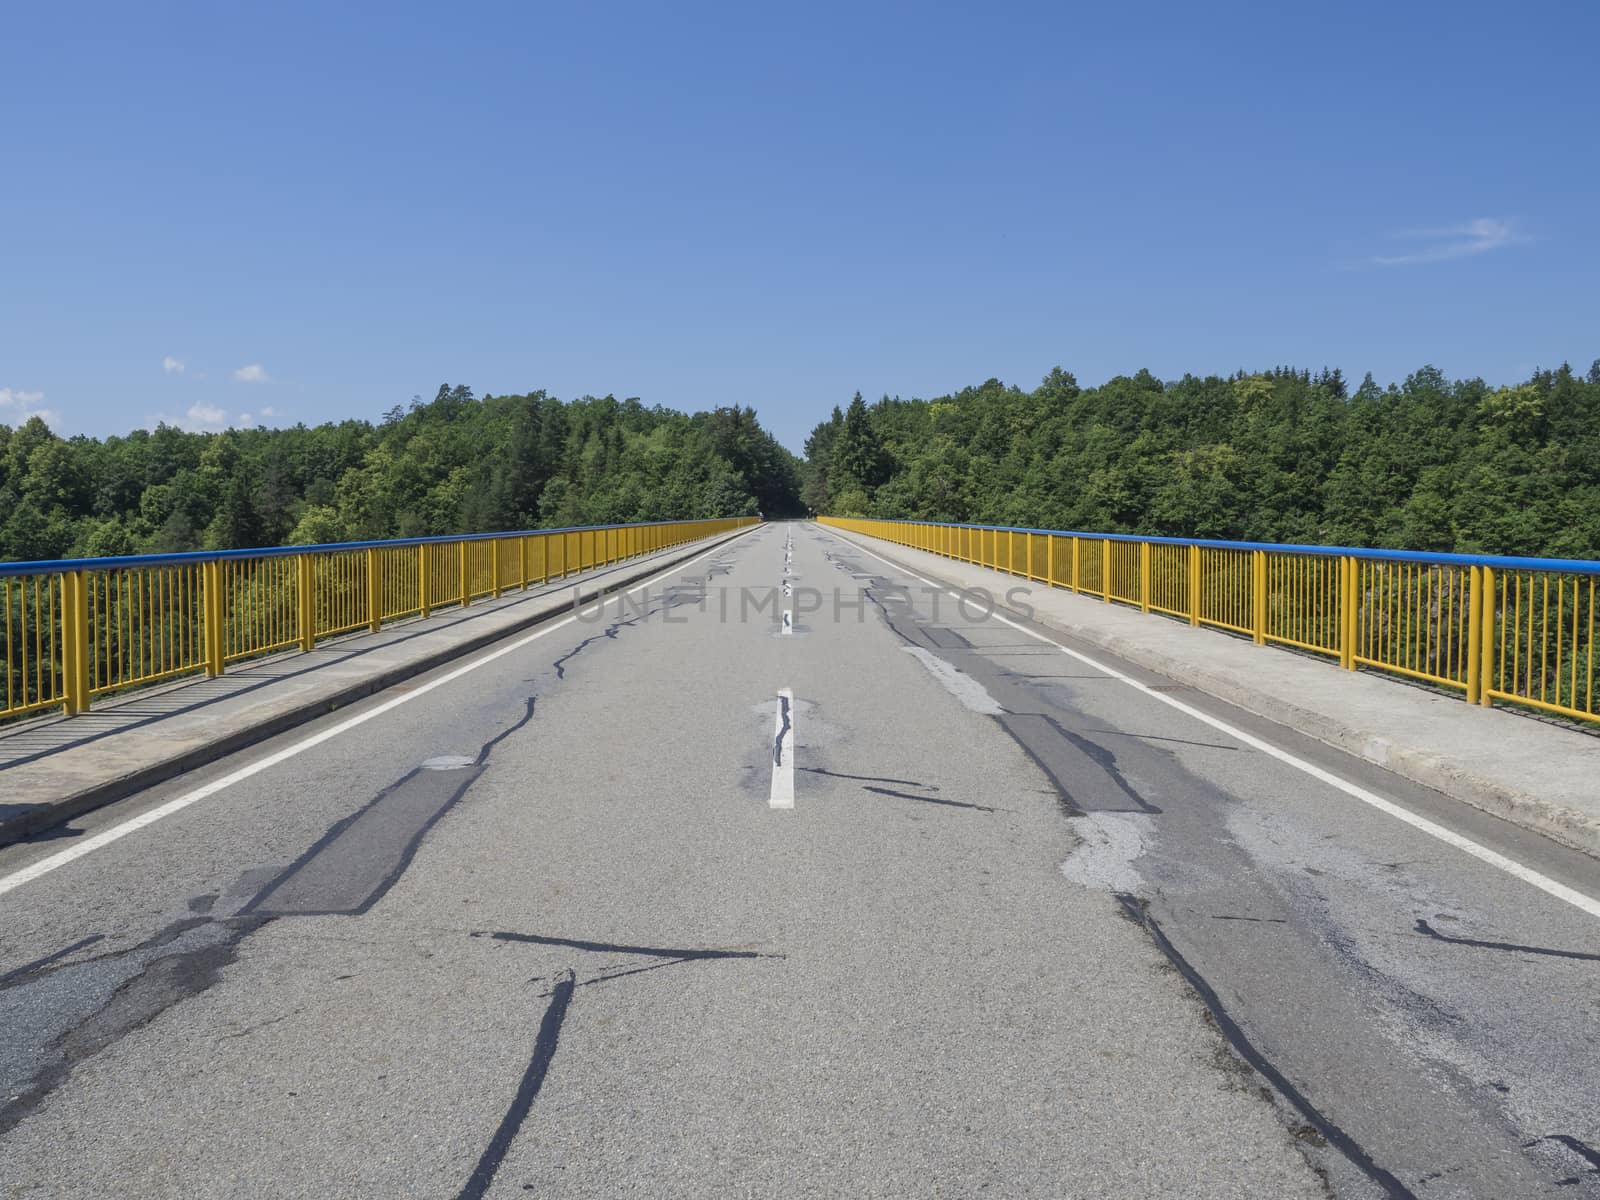 asphalt road on bridge with yellow barrier and green trees in the background, clear blue sky by Henkeova